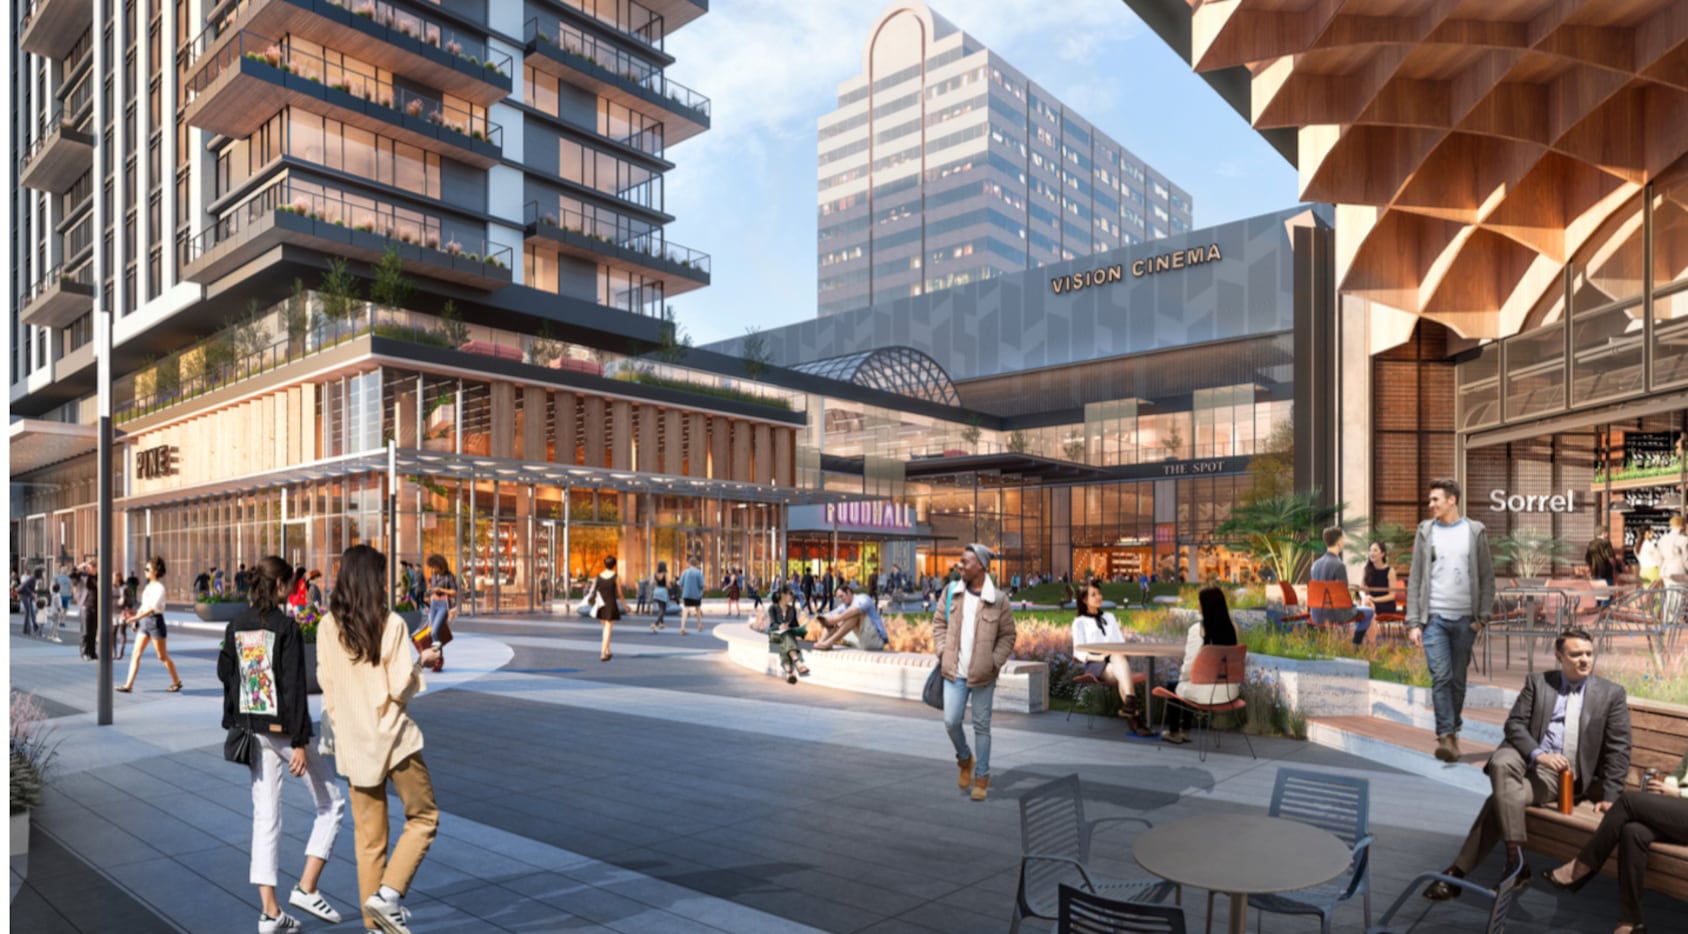 The front of the mall would be redesigned to create a more pedestrian environment.